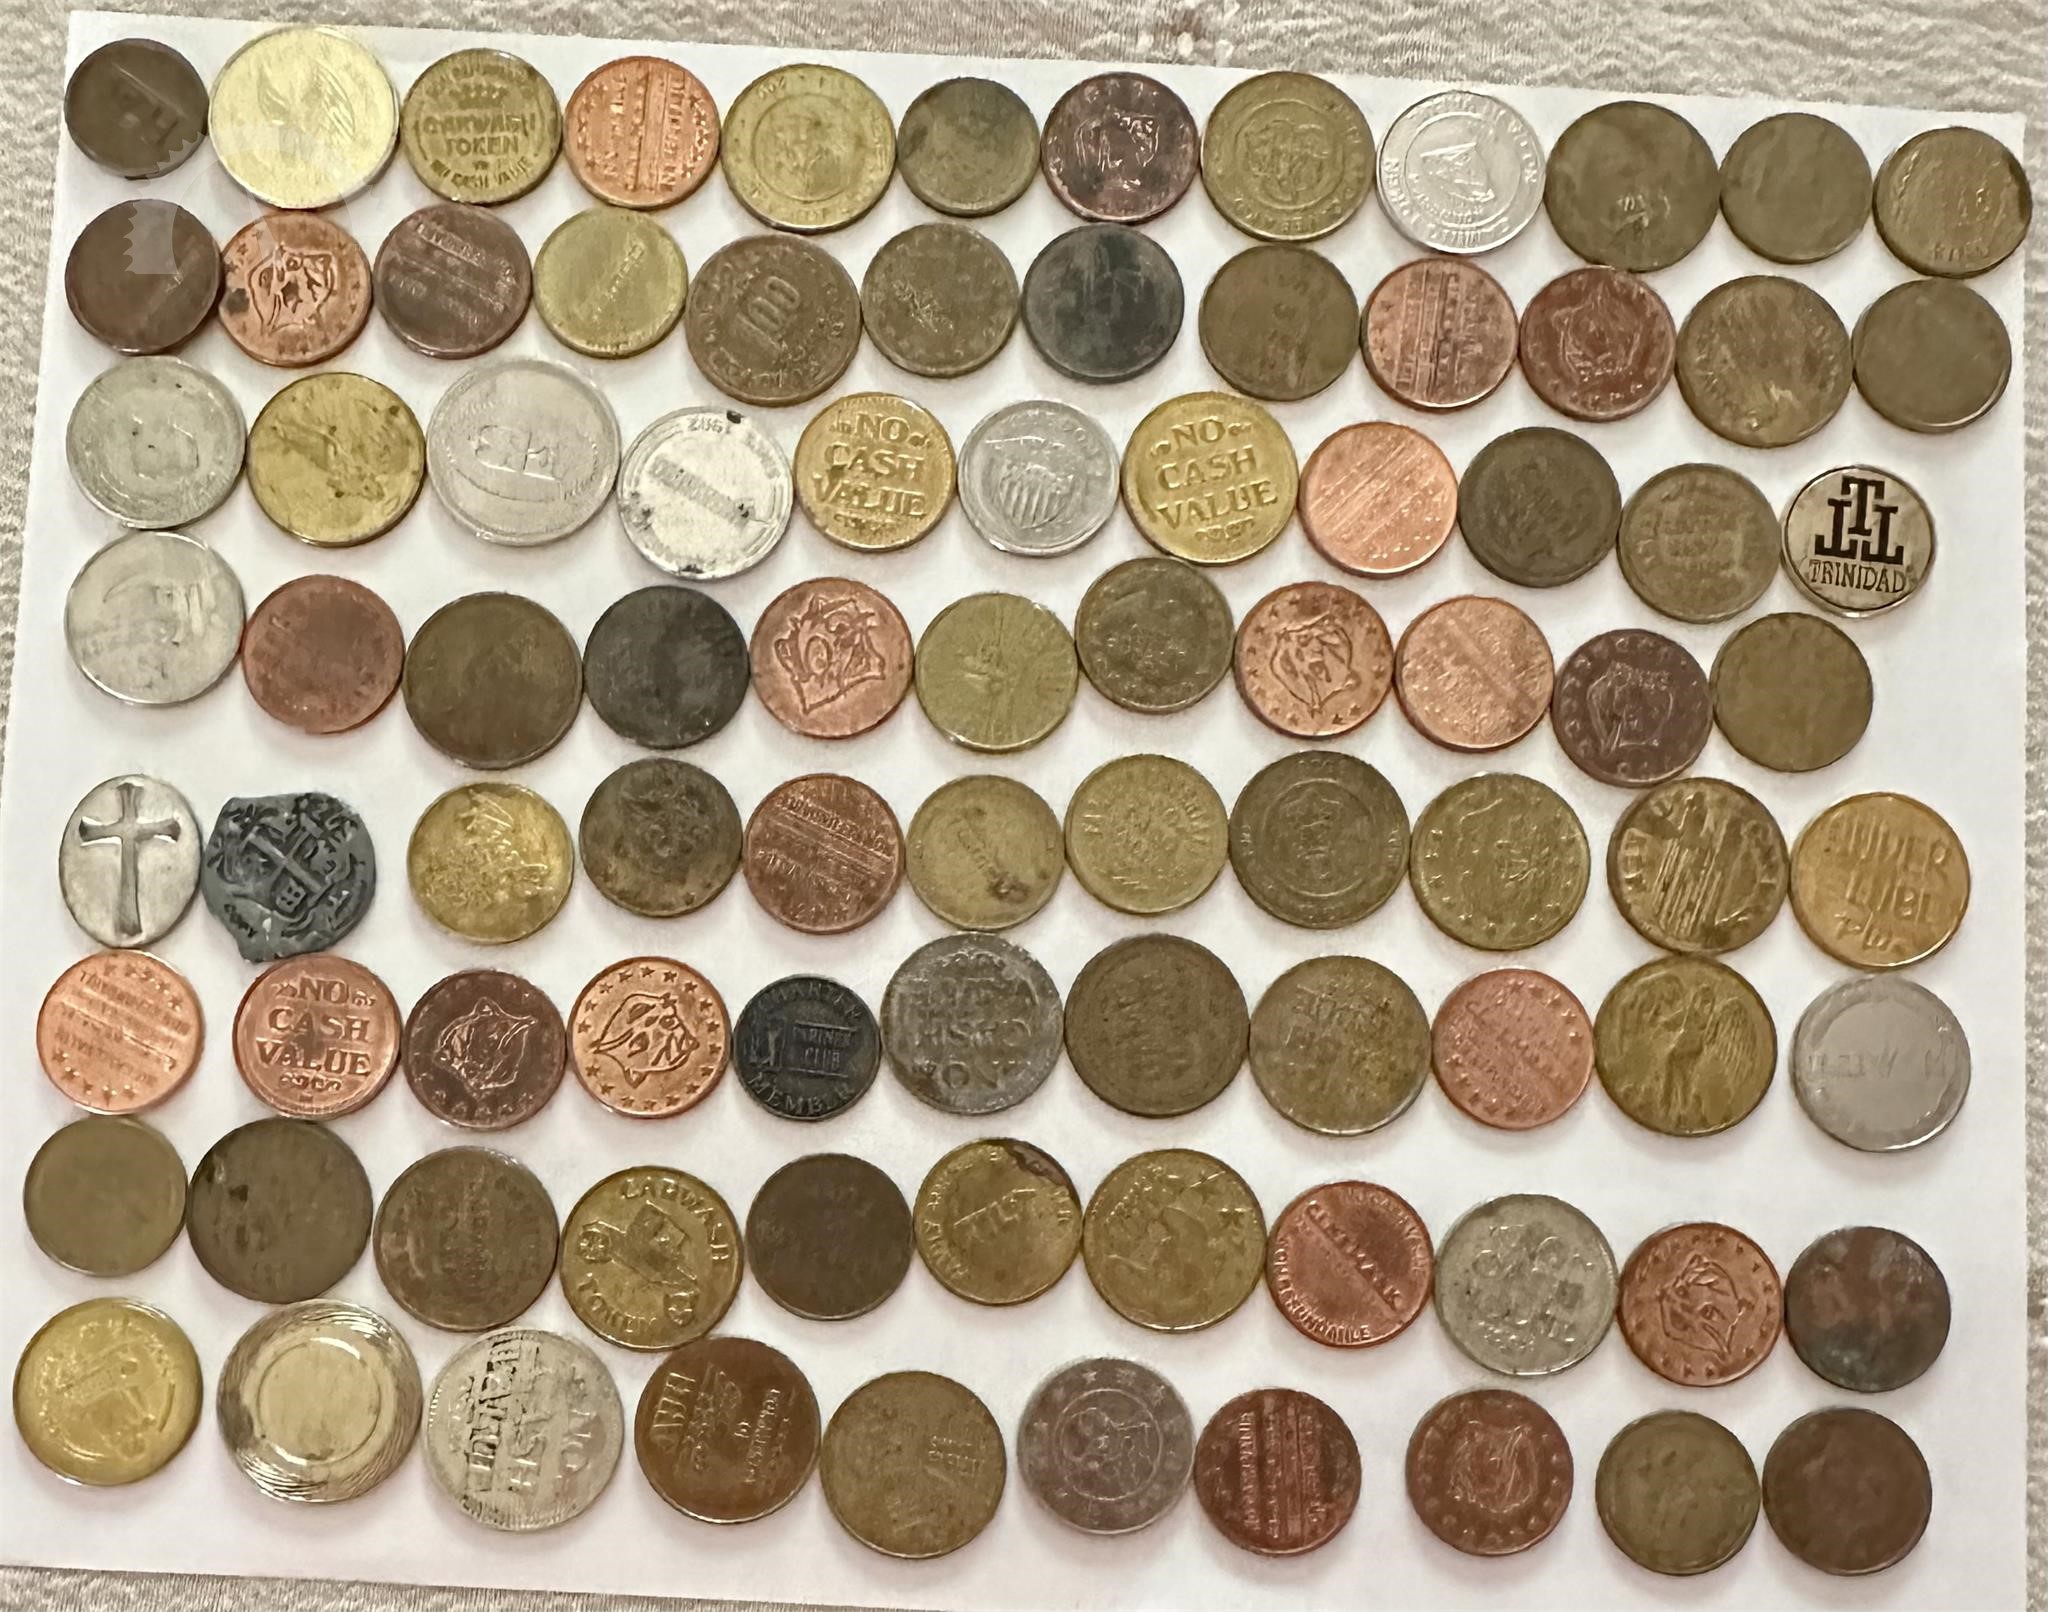 Commemorative Coins Coins / Currency Auction Results